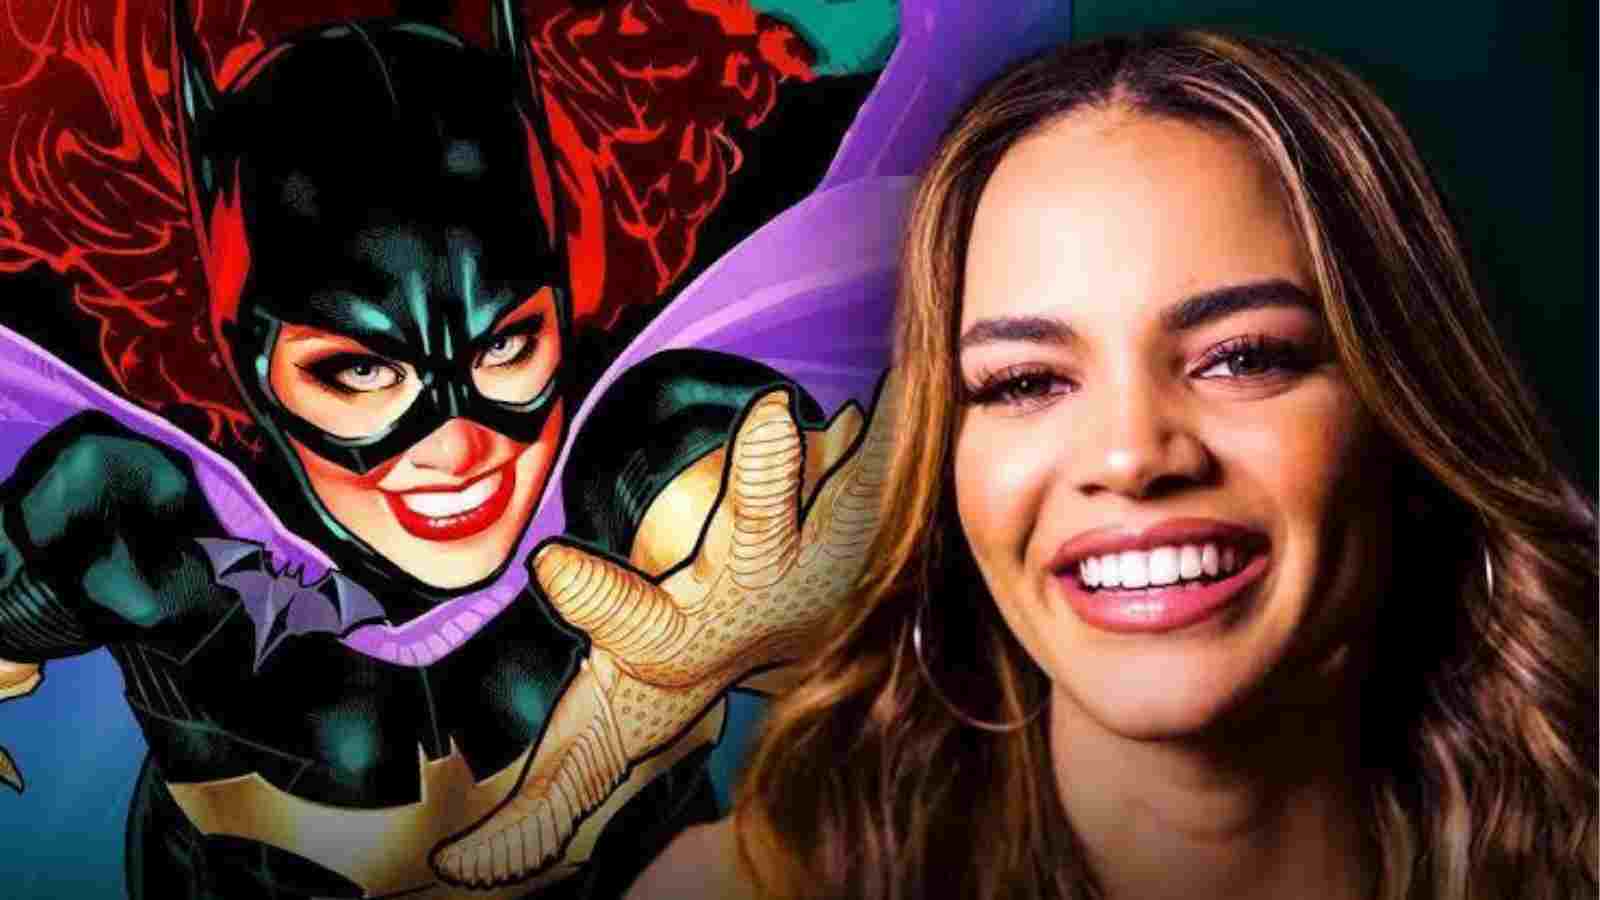 Batgirl scheduled to be released in 2023 in theatres